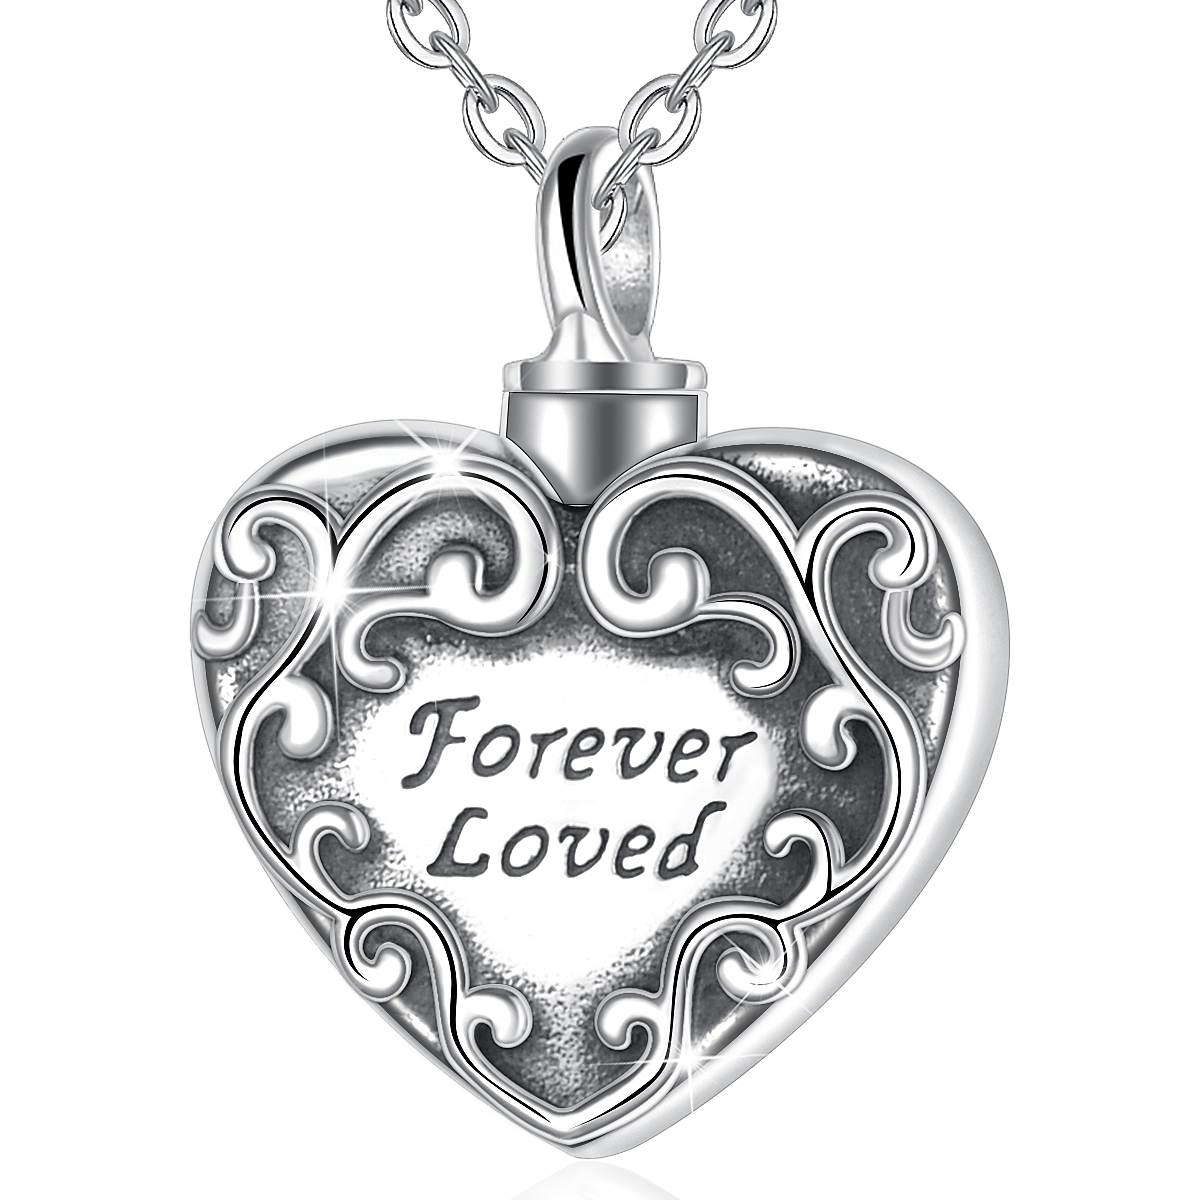 Merryshine Jewelry Wholesale 925 sterling silver heart cremation jewelry urn ashes pendant